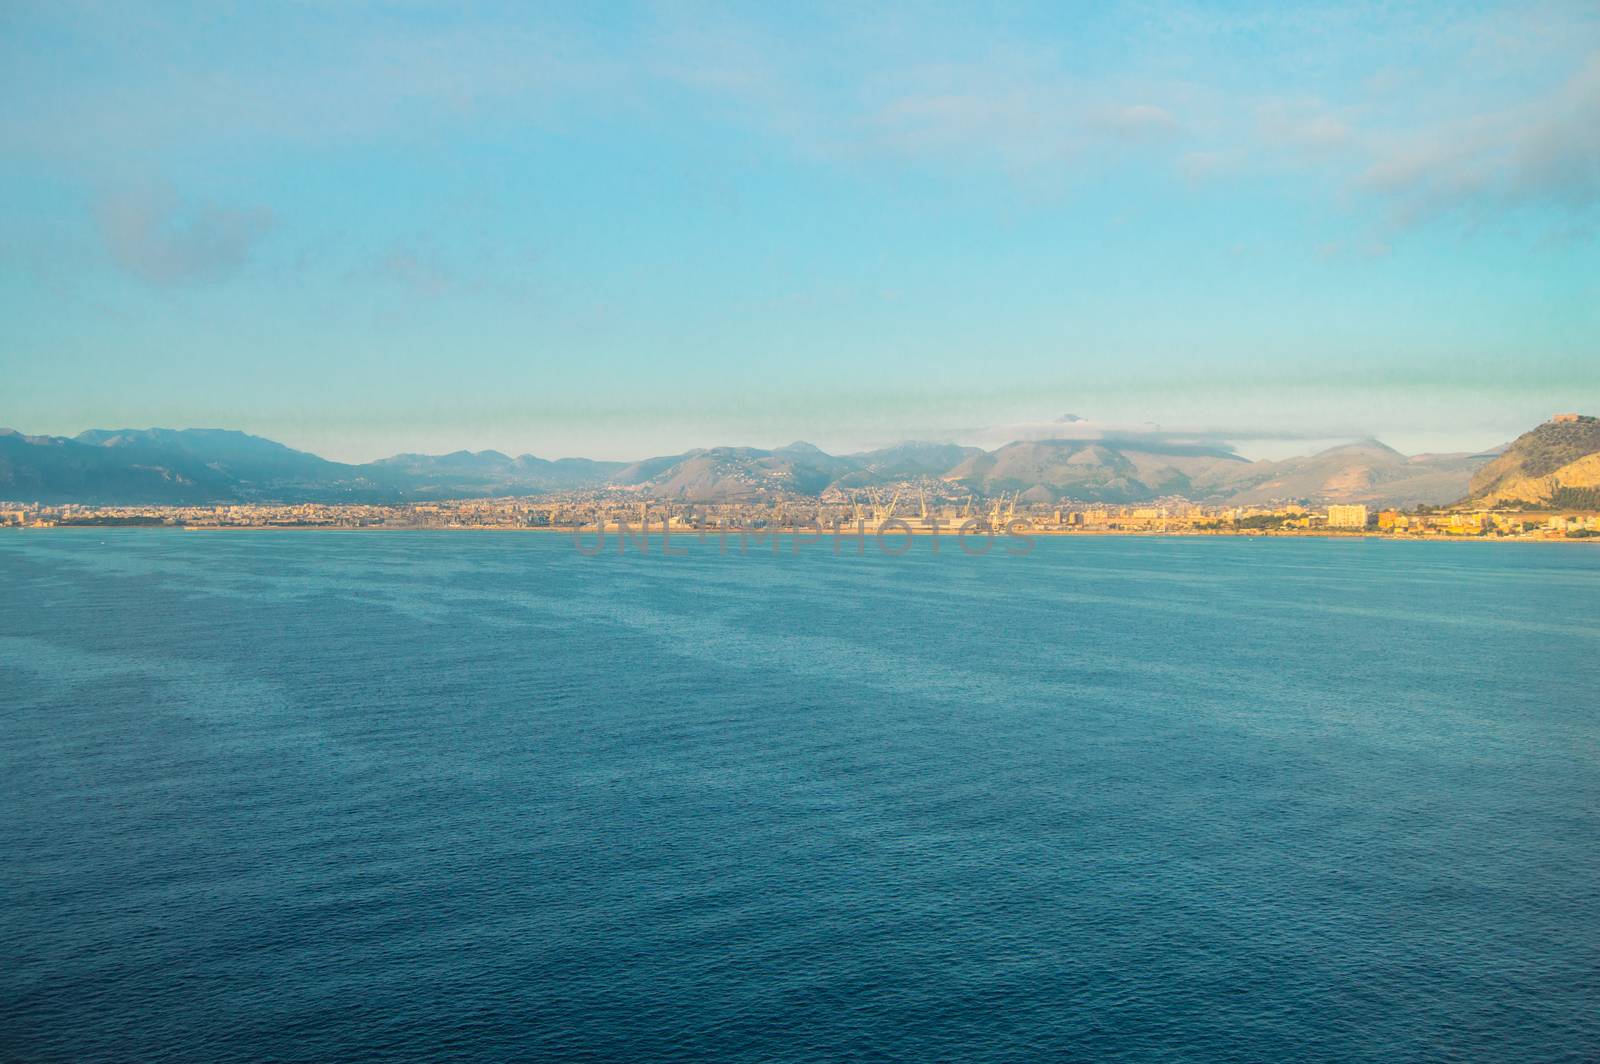 Beautiful sunrise over Palermo, panorama of the city from the sea.